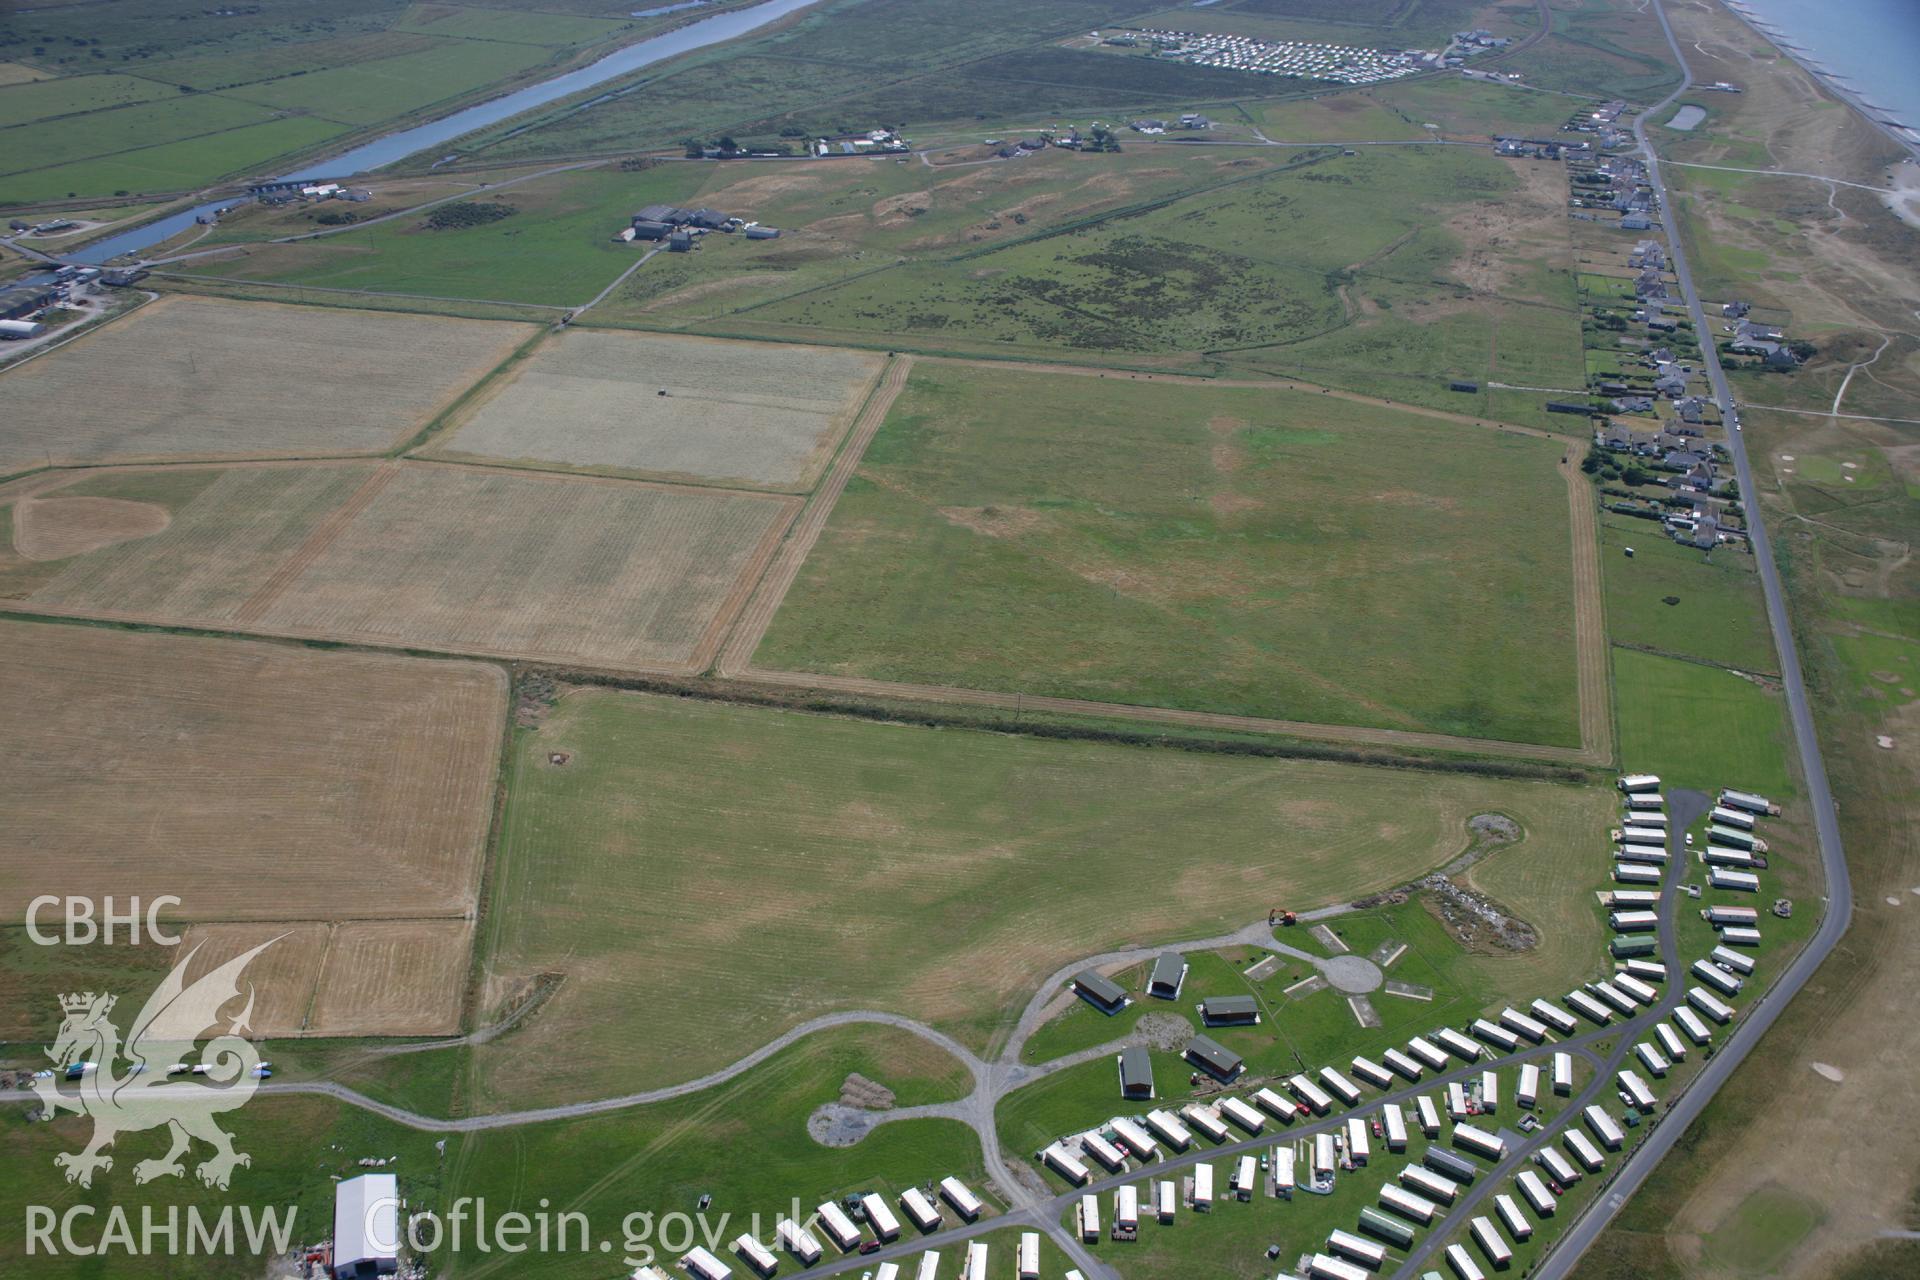 RCAHMW colour oblique aerial photograph of Ynyslas Nature Reserve Firing Range. Taken on 17 July 2006 by Toby Driver.